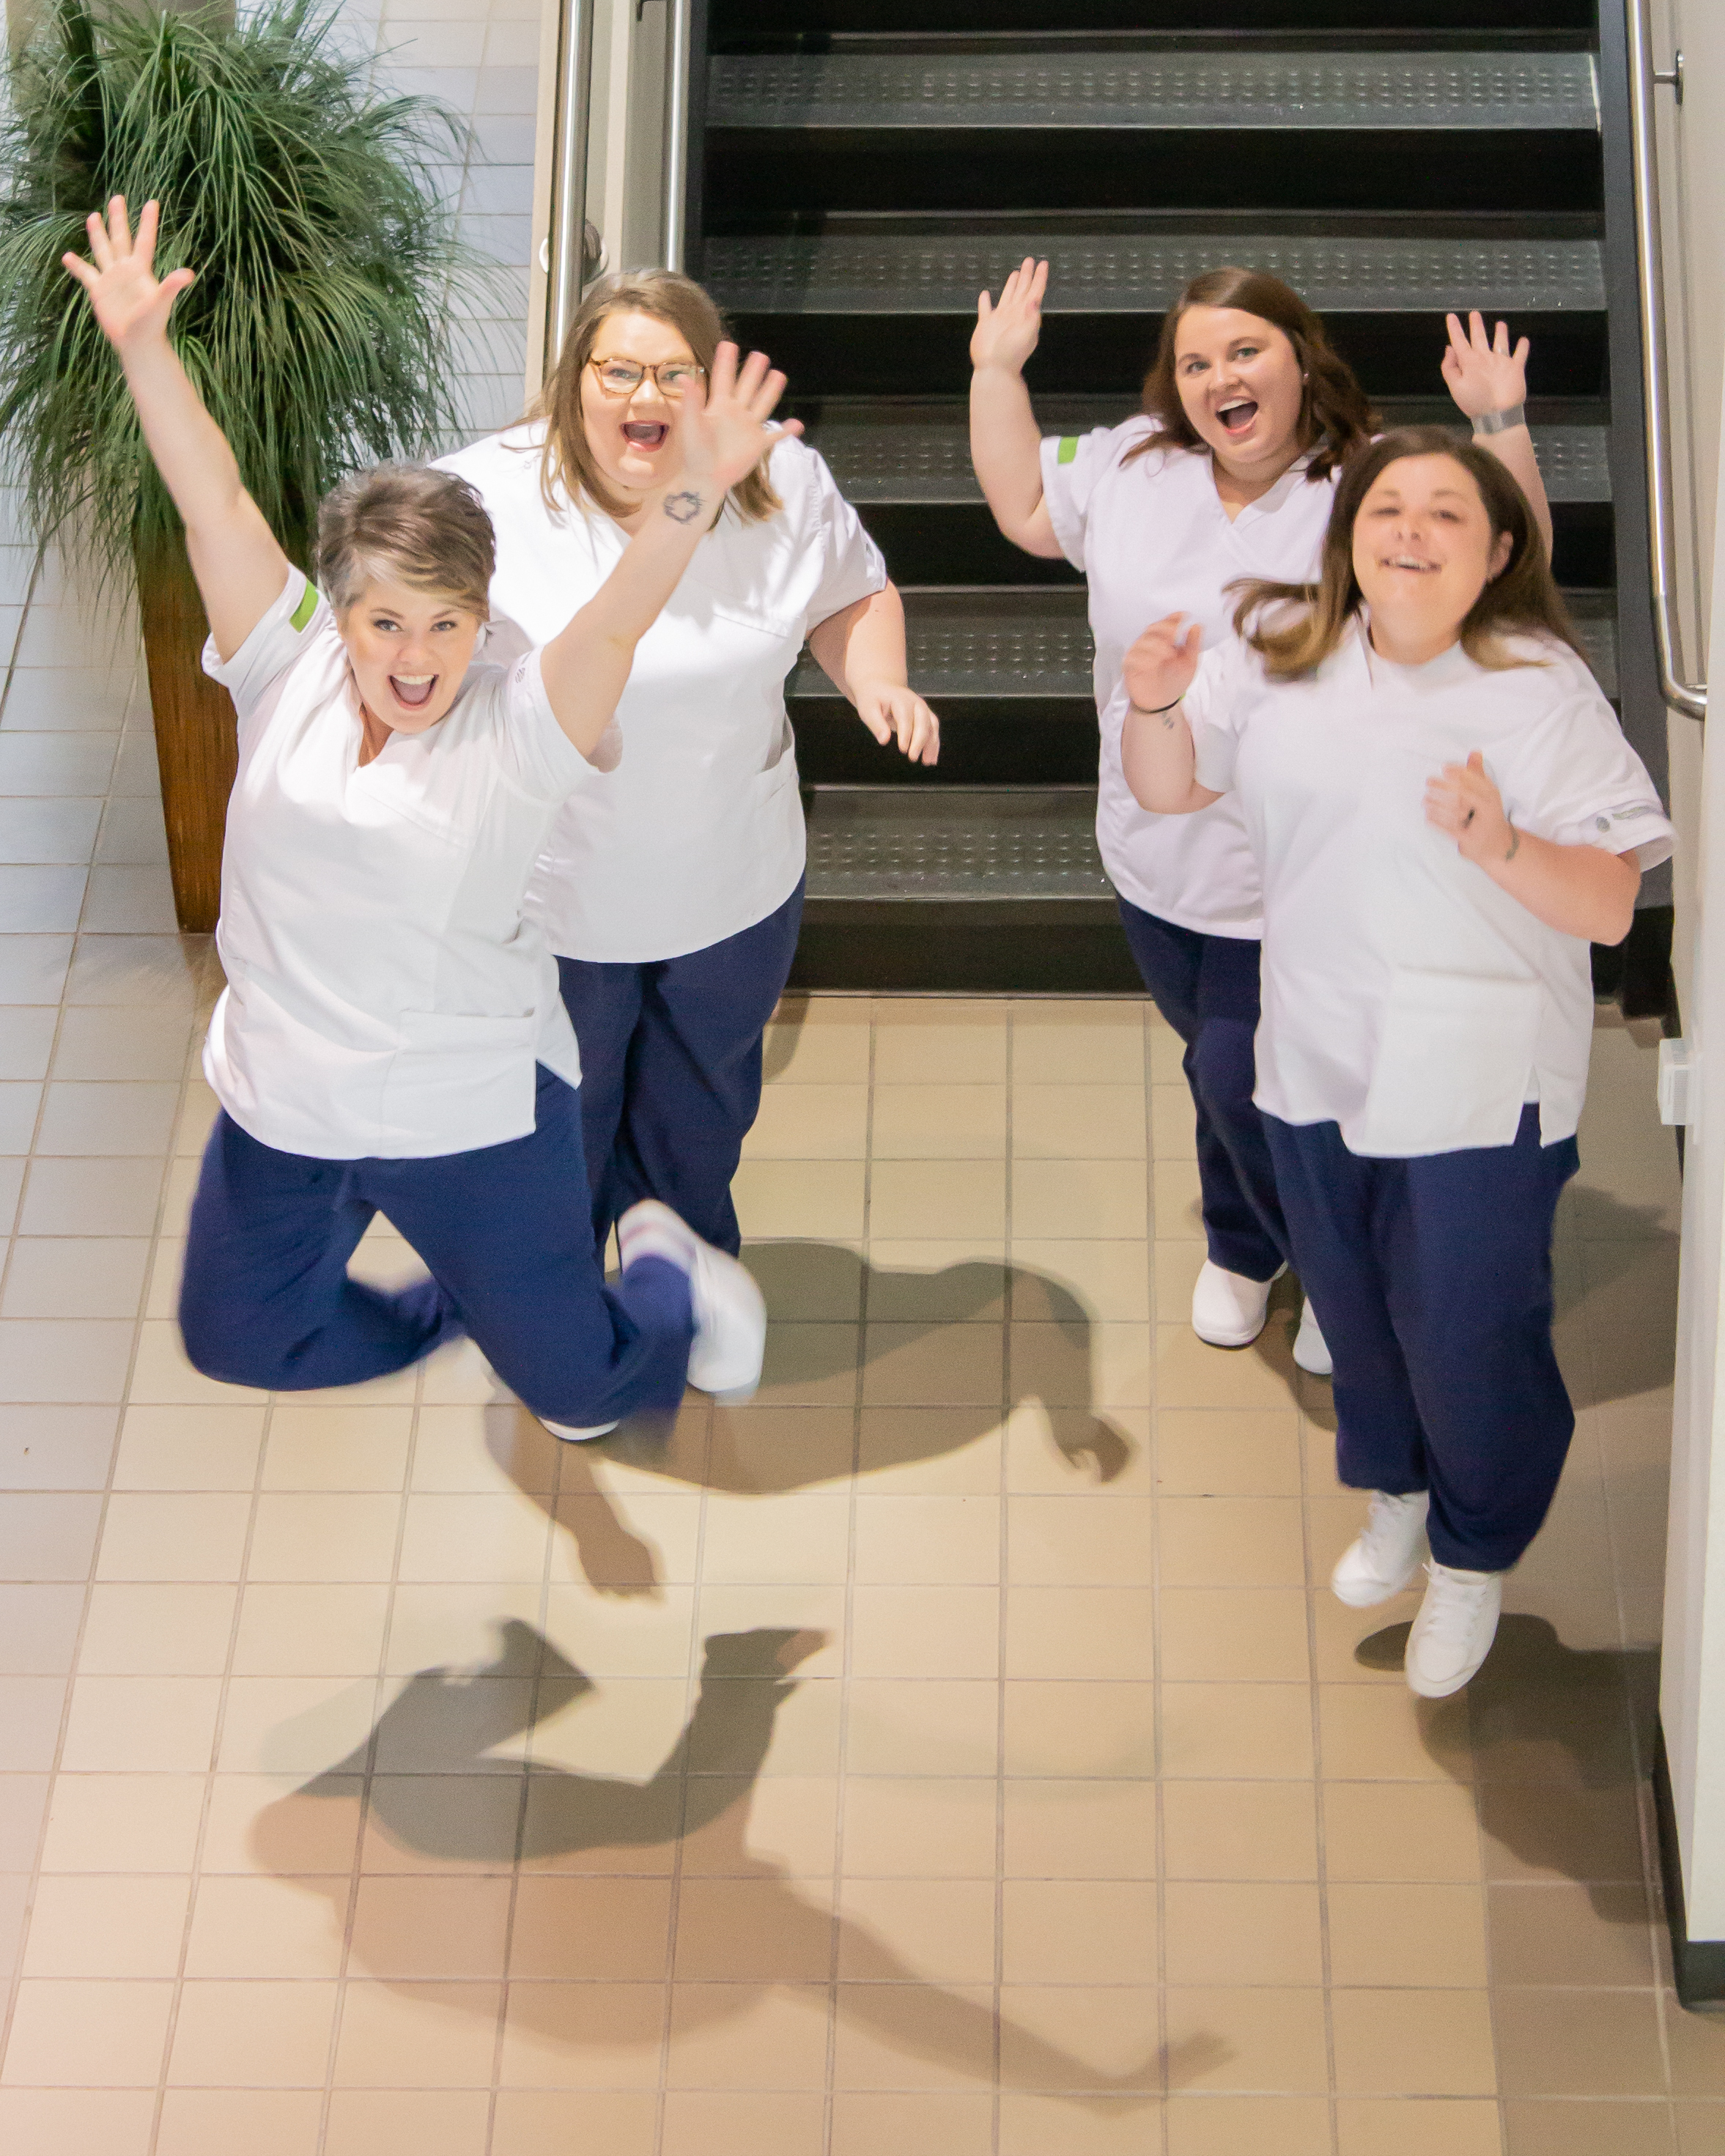 Photo for Tifton SRTC Nursing Class Achieves 100% Pass Rate On Board Exams